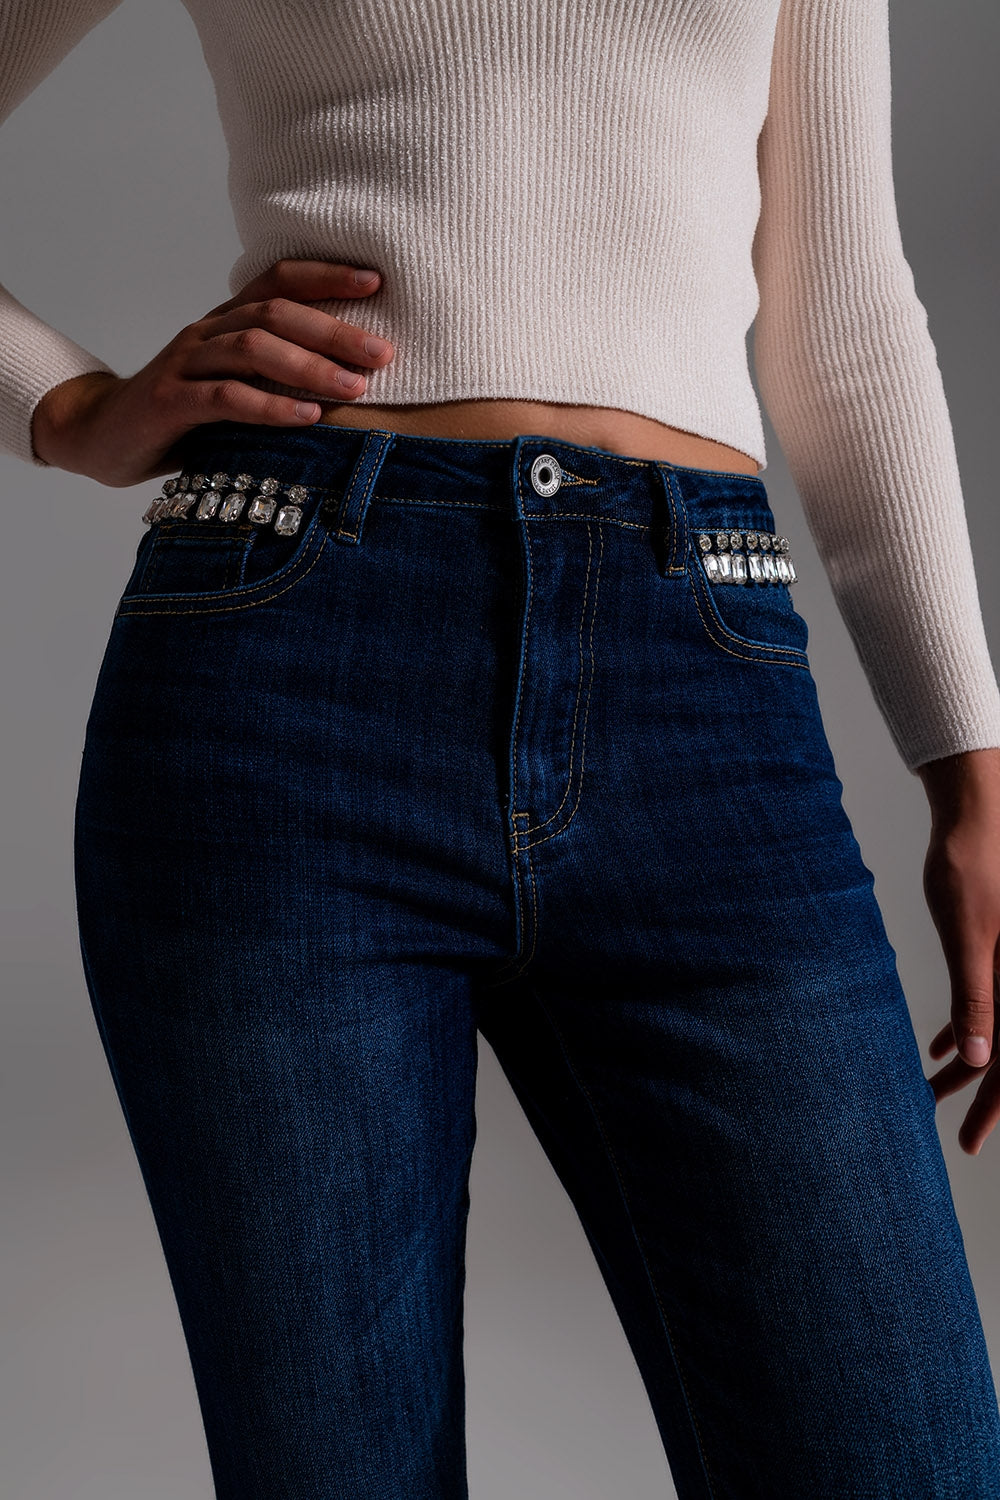 Jeans With Strass Fringe at Pockets in Dark Wash